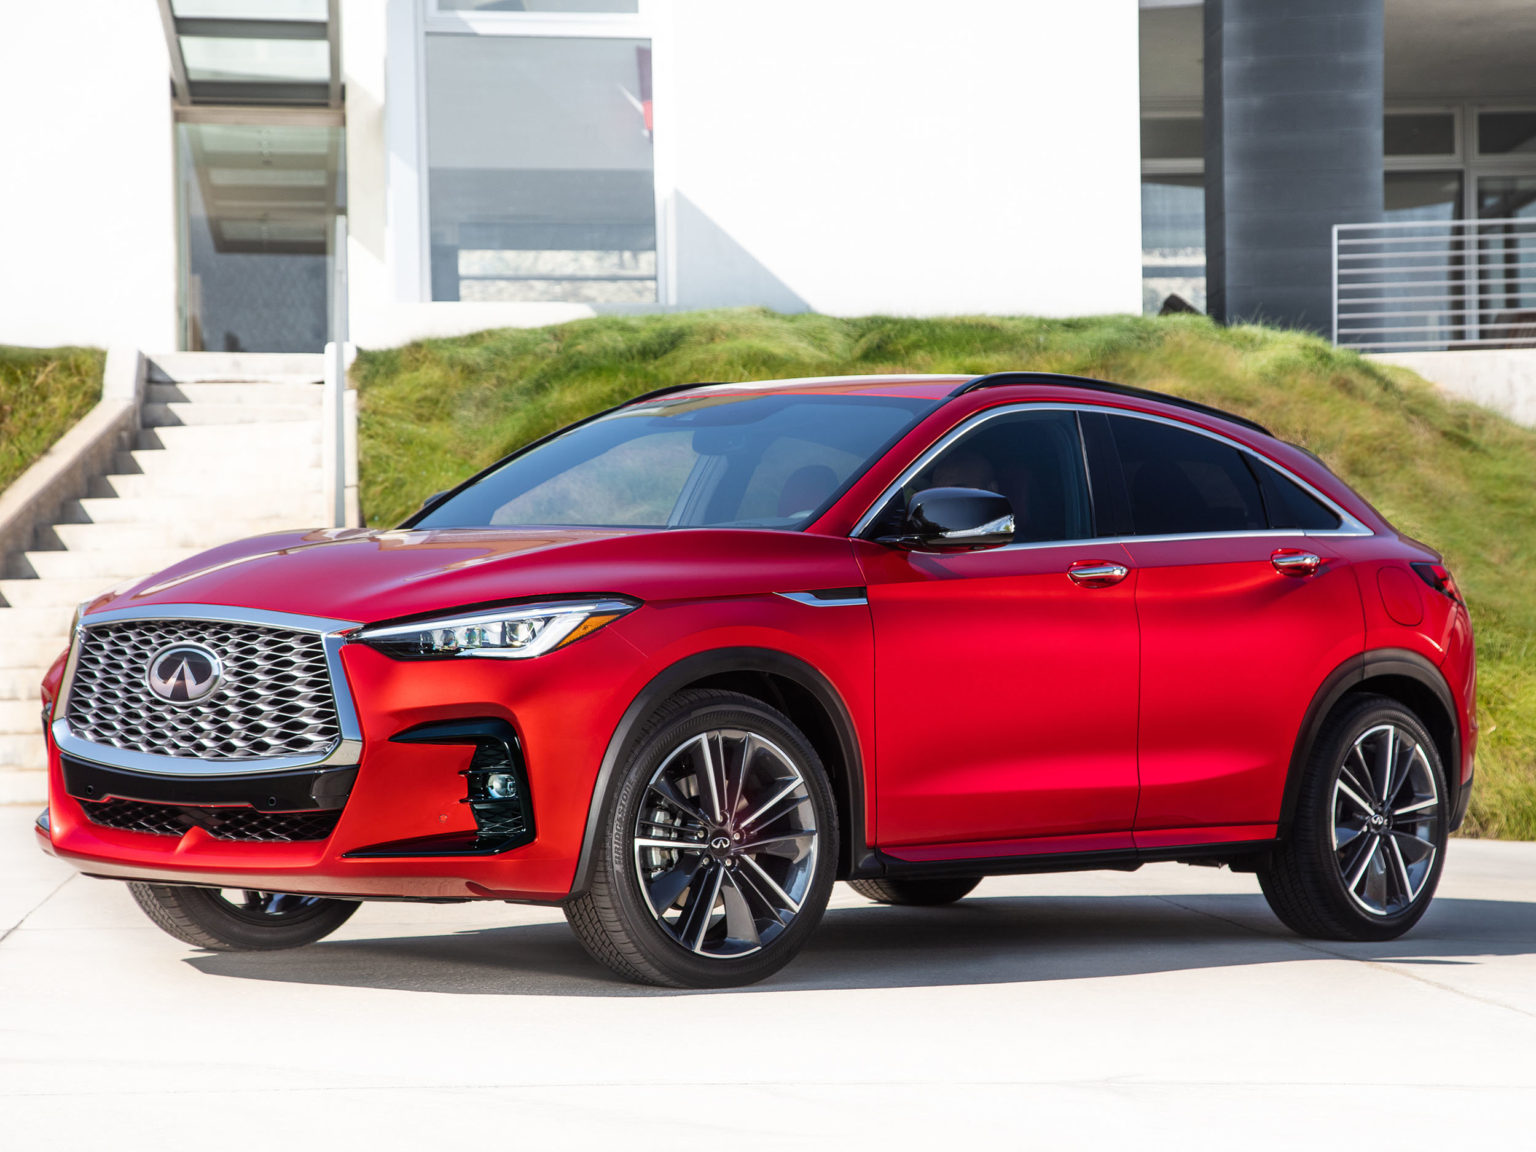 The 2022 Infiniti QX55 is a new addition to the company's portfolio.